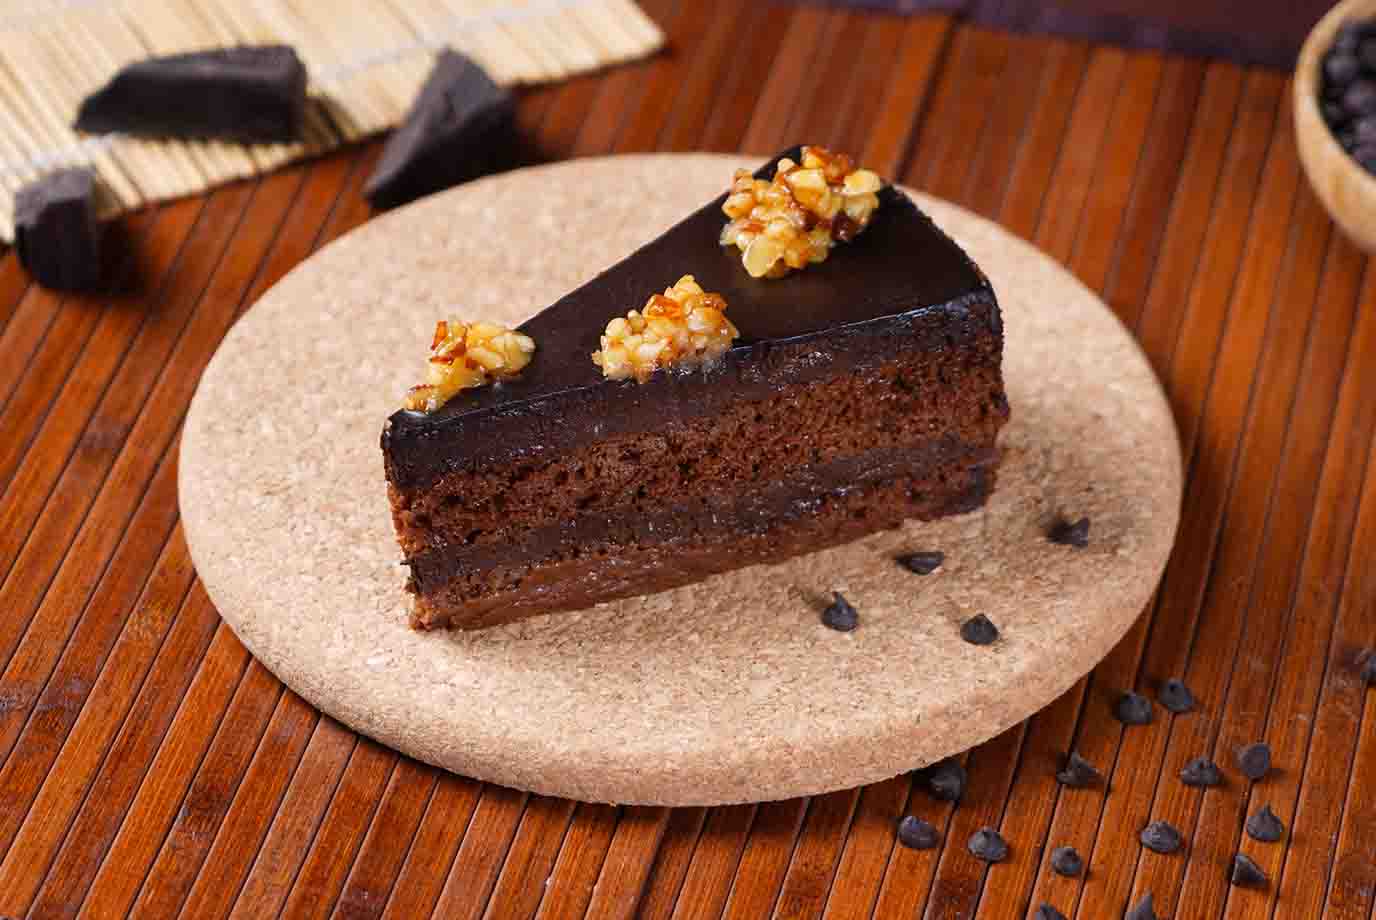 Discover more than 143 faasos cake best - awesomeenglish.edu.vn